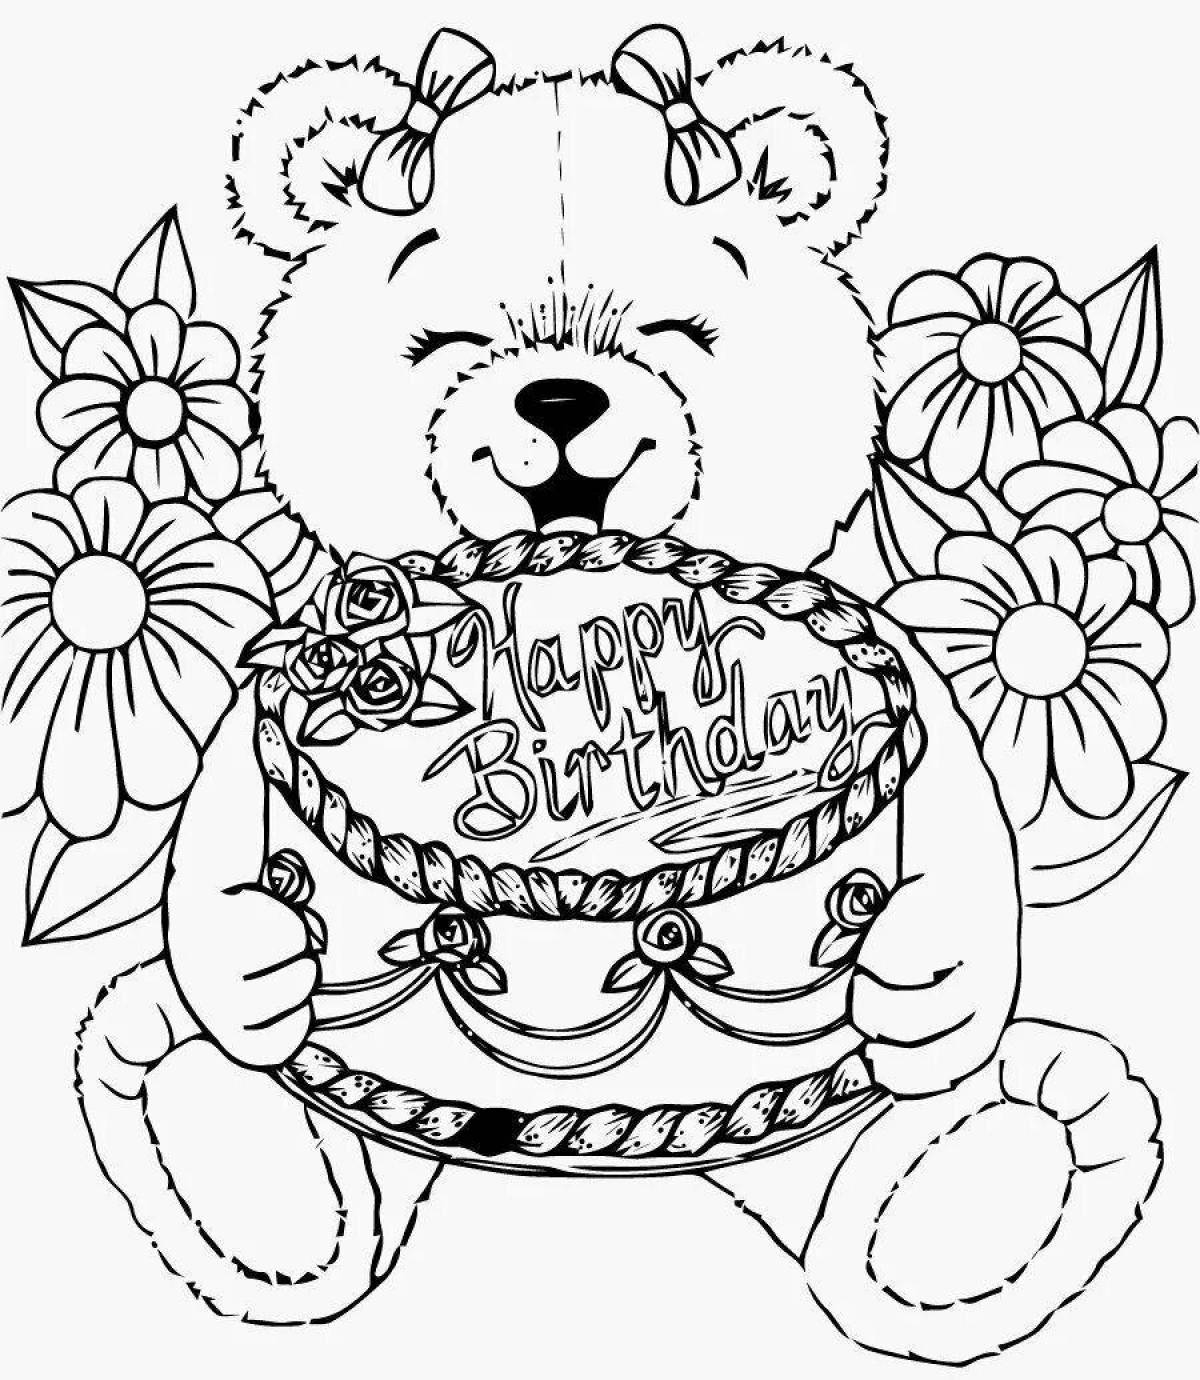 Happy birthday card for kids #3